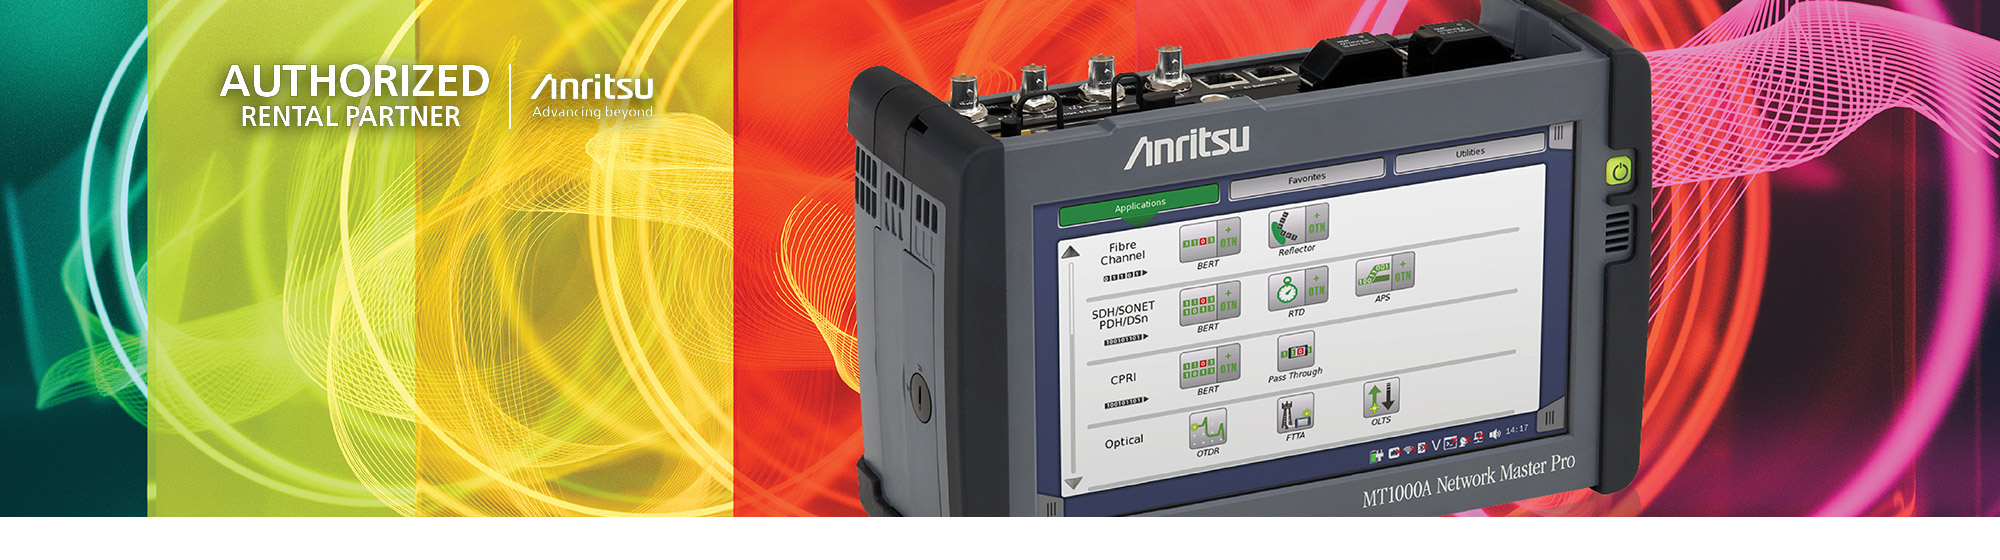 Advanced Test Equipment Corporation Becomes Authorized Rental Partner for Anritsu 